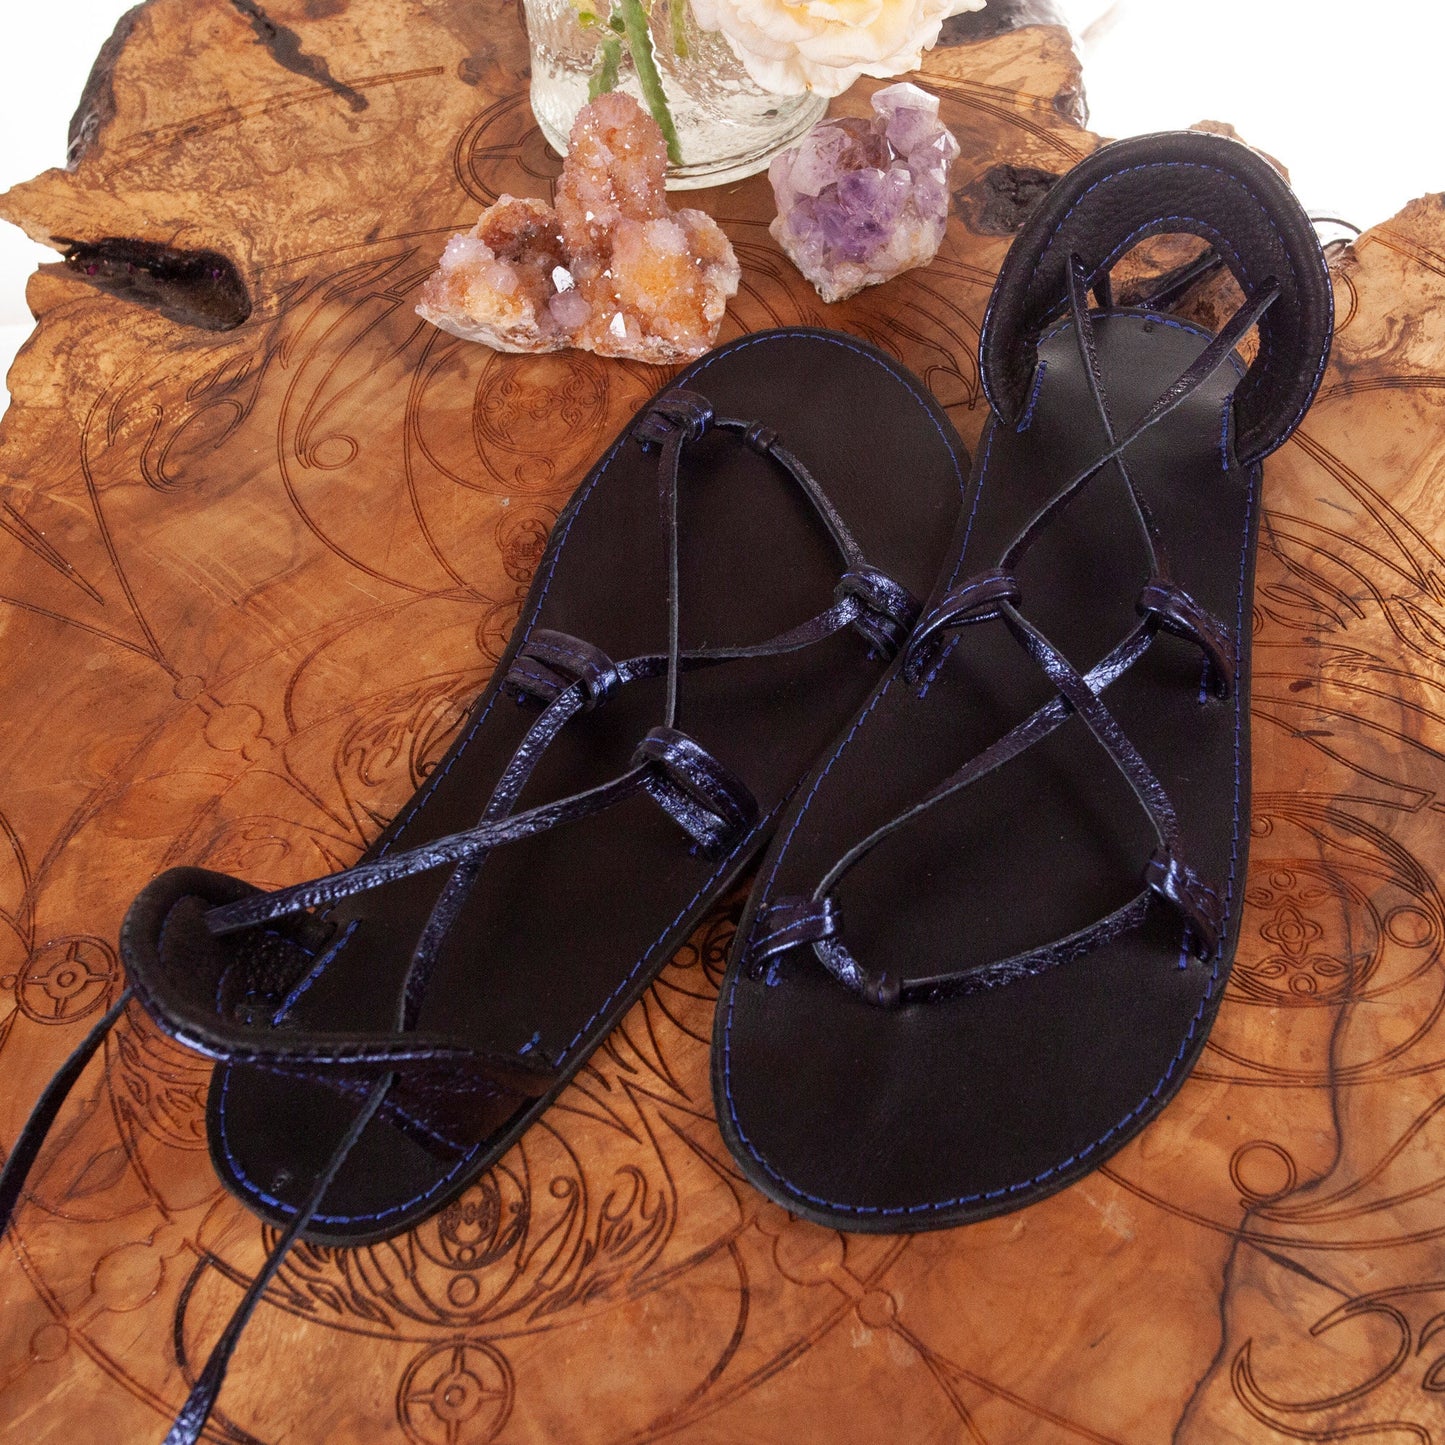 Oasis Leather Sandals Size 9 | In-Stock